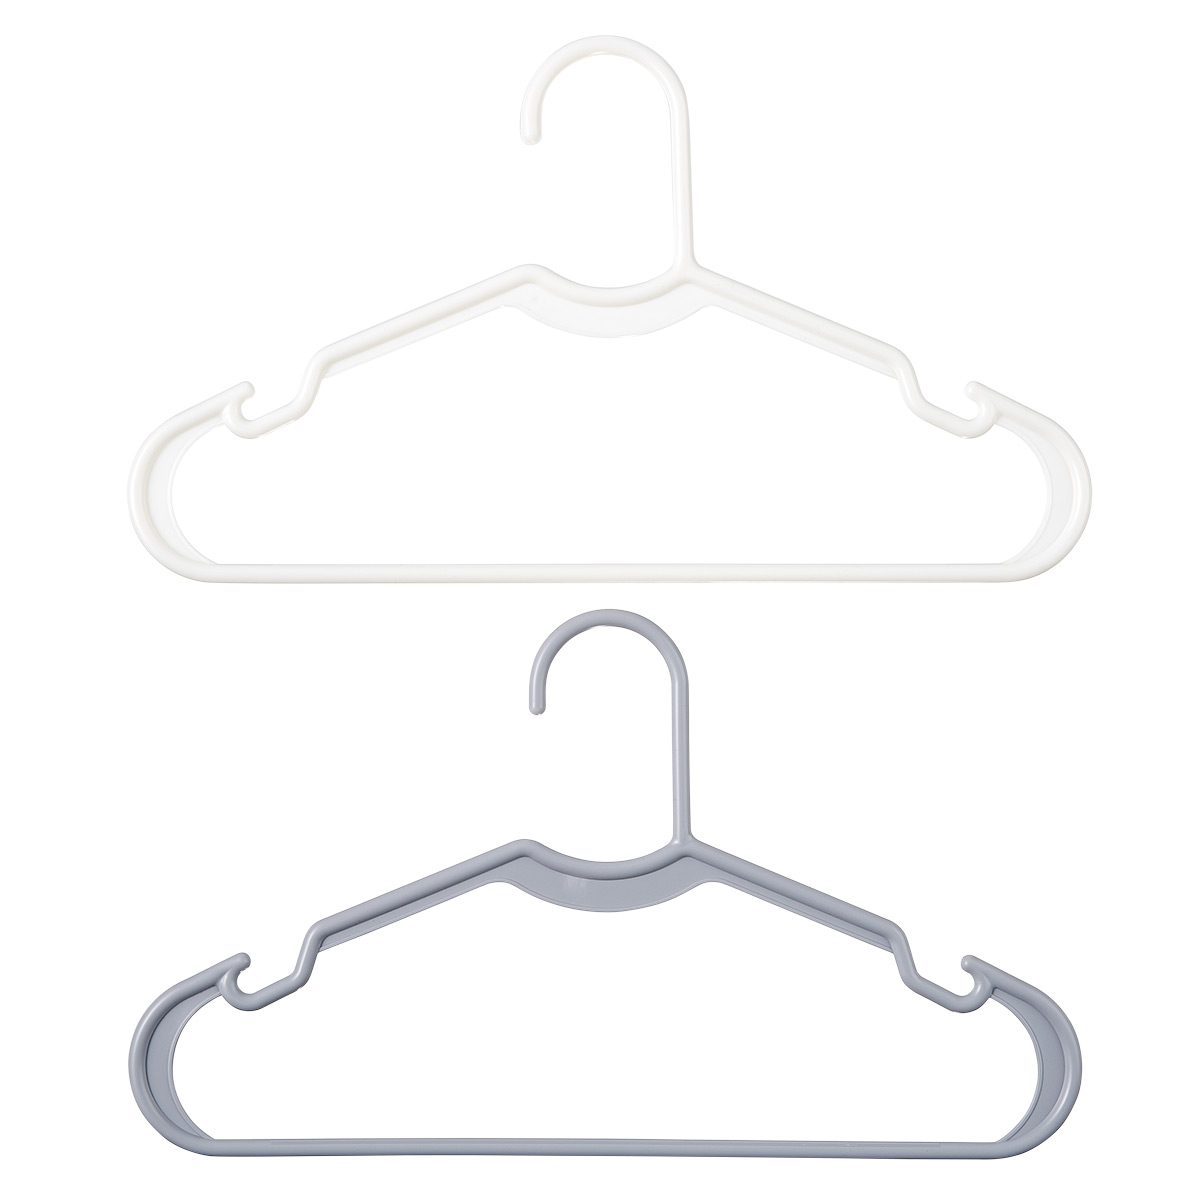 Kid's Wooden Hanger White Pkg/6, 12 x 1/2 x 7-3/4 H | The Container Store